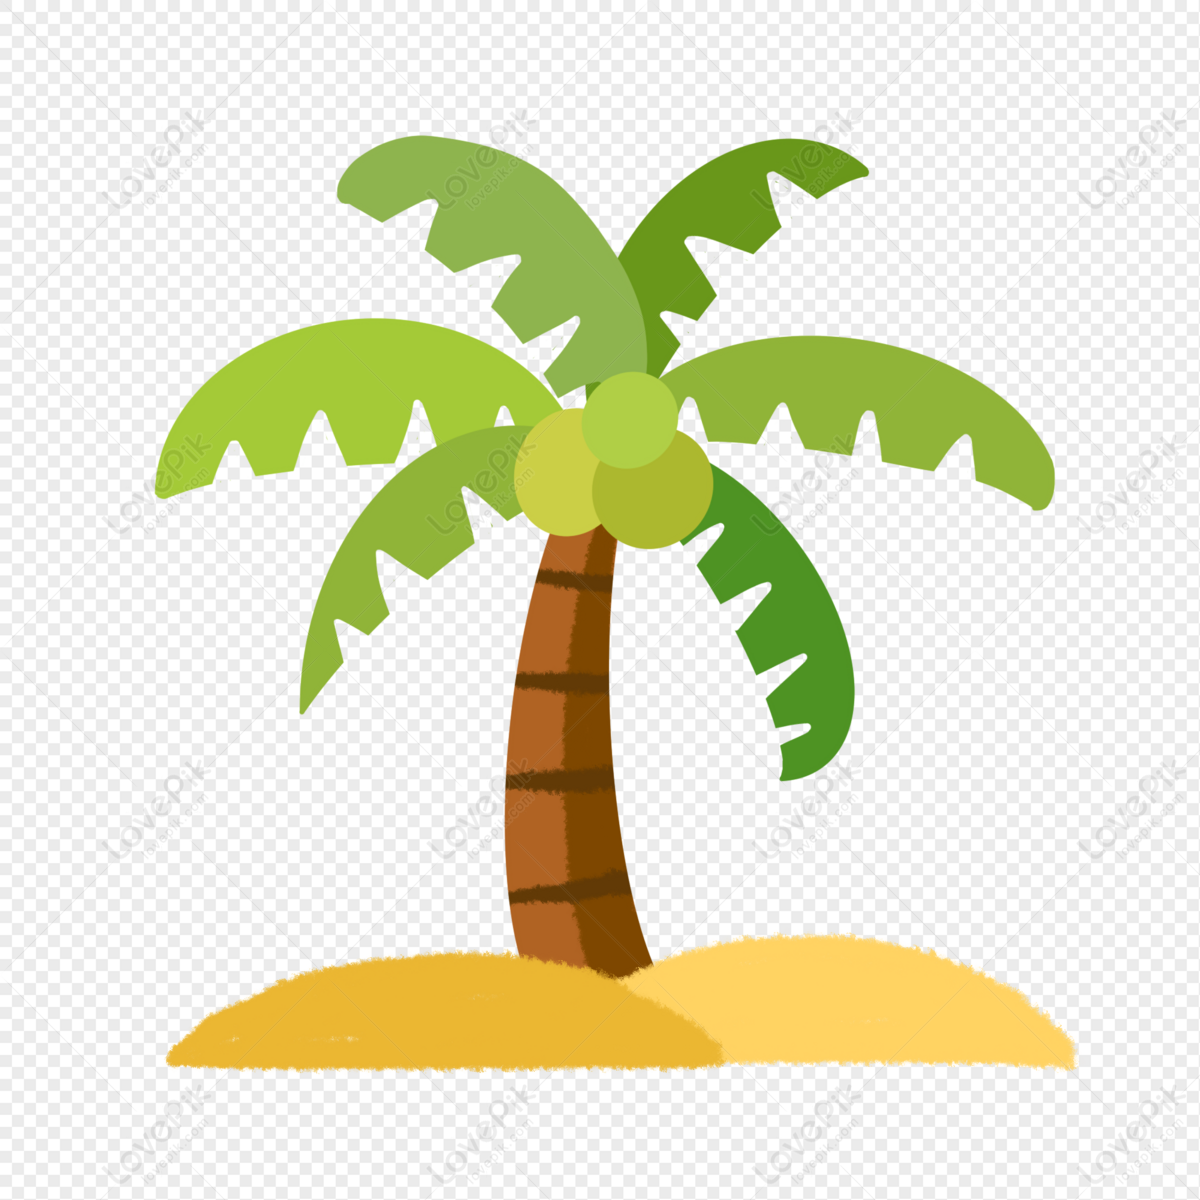 Coconut Tree PNG Transparent And Clipart Image For Free Download ...